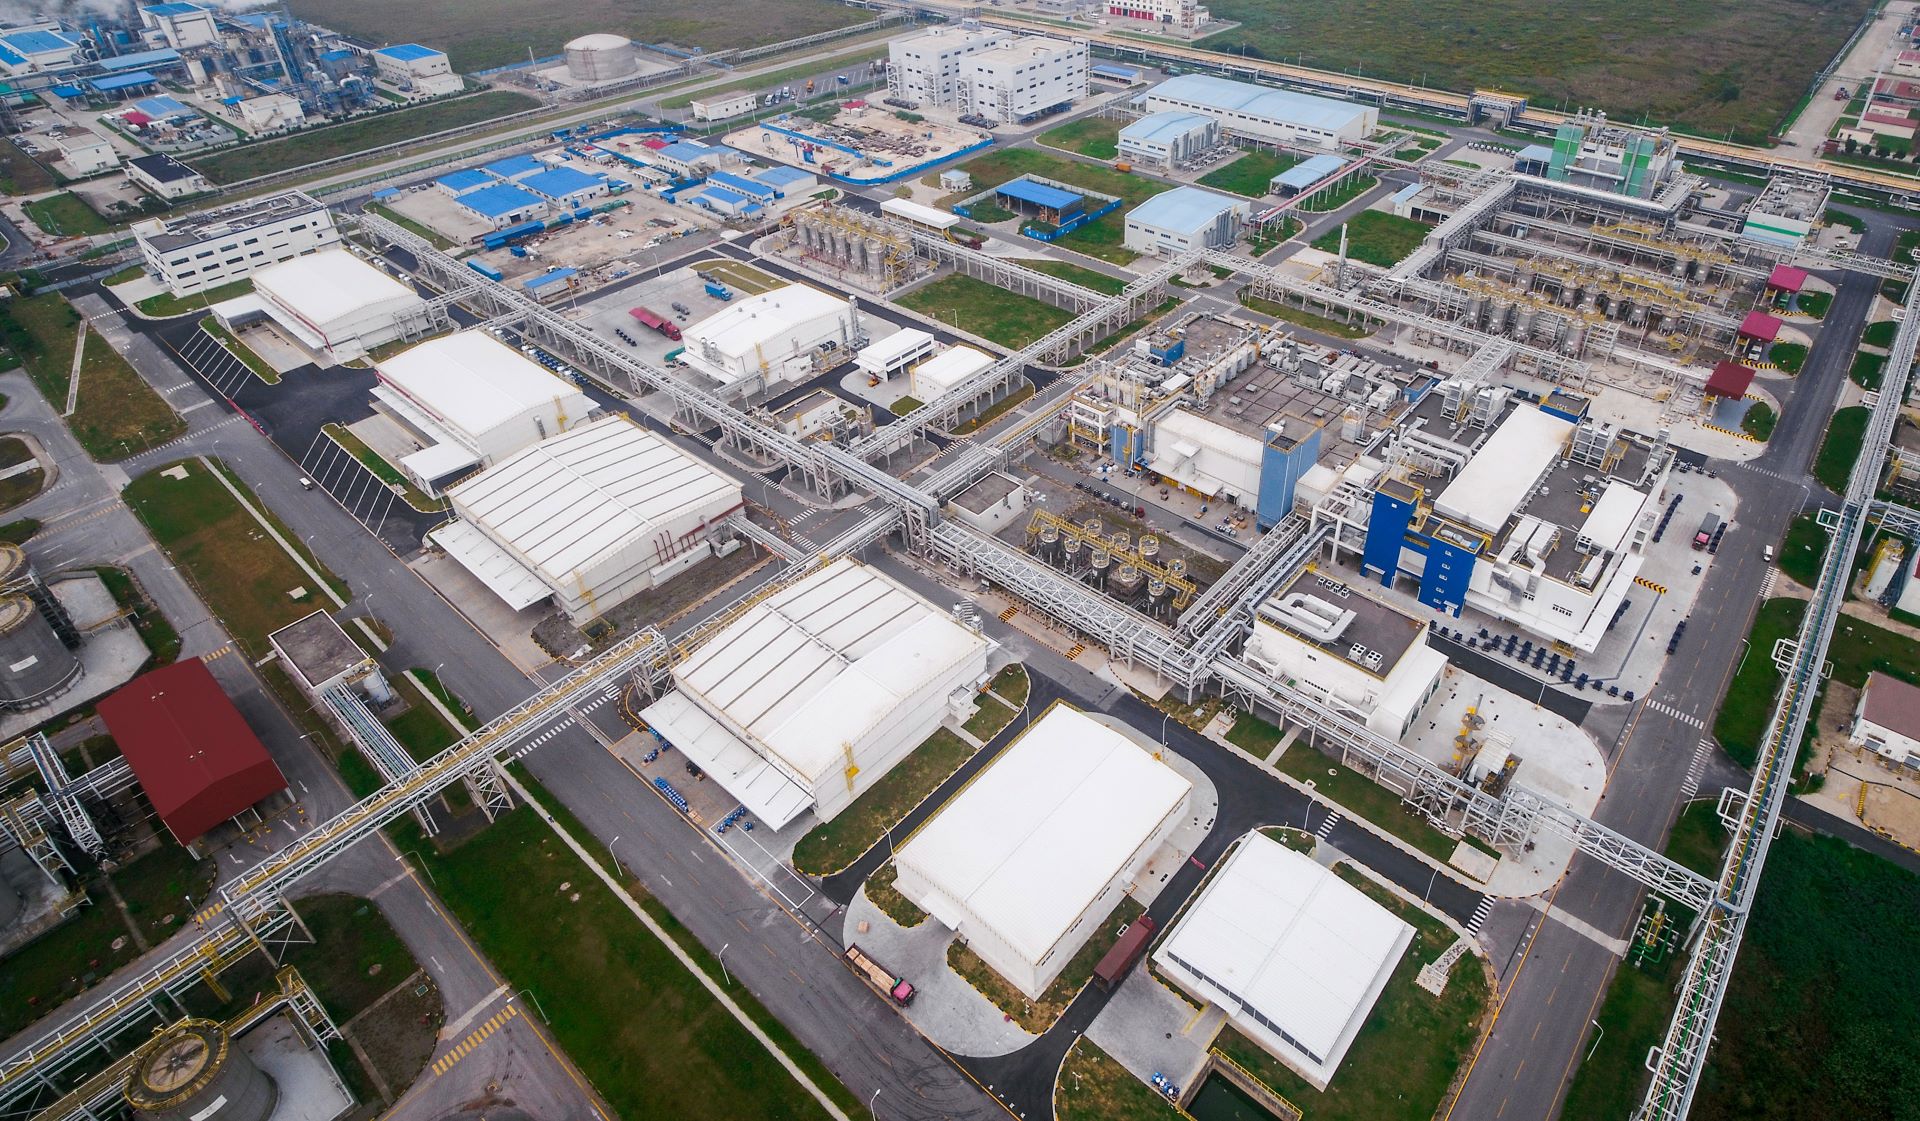 Basf Chinese Operations Announce 100 Per Cent Renewable Energy Usage